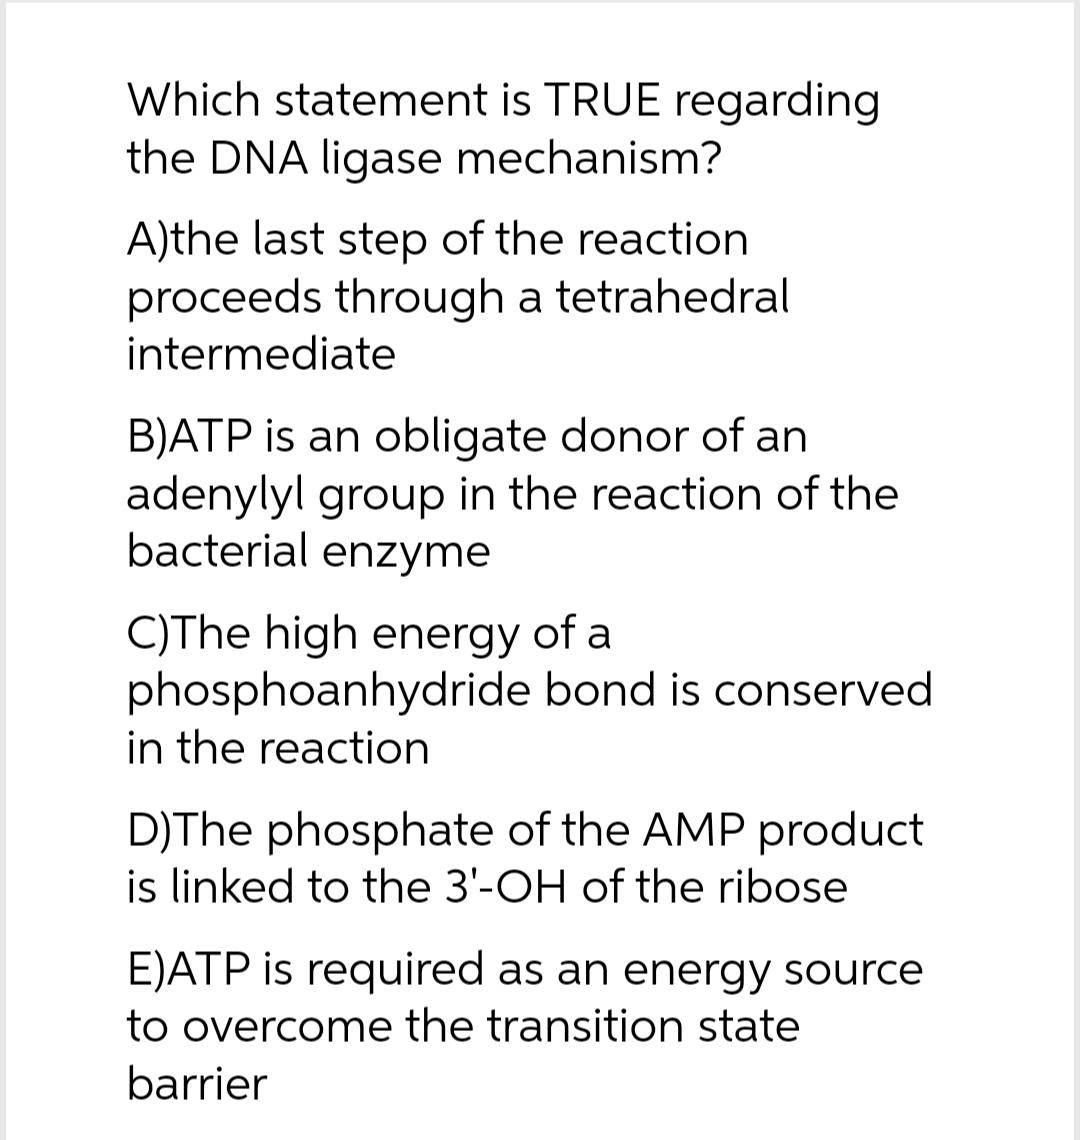 Which statement is TRUE regarding
the DNA ligase mechanism?
A)the last step of the reaction
proceeds through a tetrahedral
intermediate
B)ATP is an obligate donor of an
adenylyl group in the reaction of the
bacterial enzyme
C)The high energy of a
phosphoanhydride bond is conserved
in the reaction
D)The phosphate of the AMP product
is linked to the 3'-OH of the ribose
E)ATP is required as an energy source
to overcome the transition state
barrier
